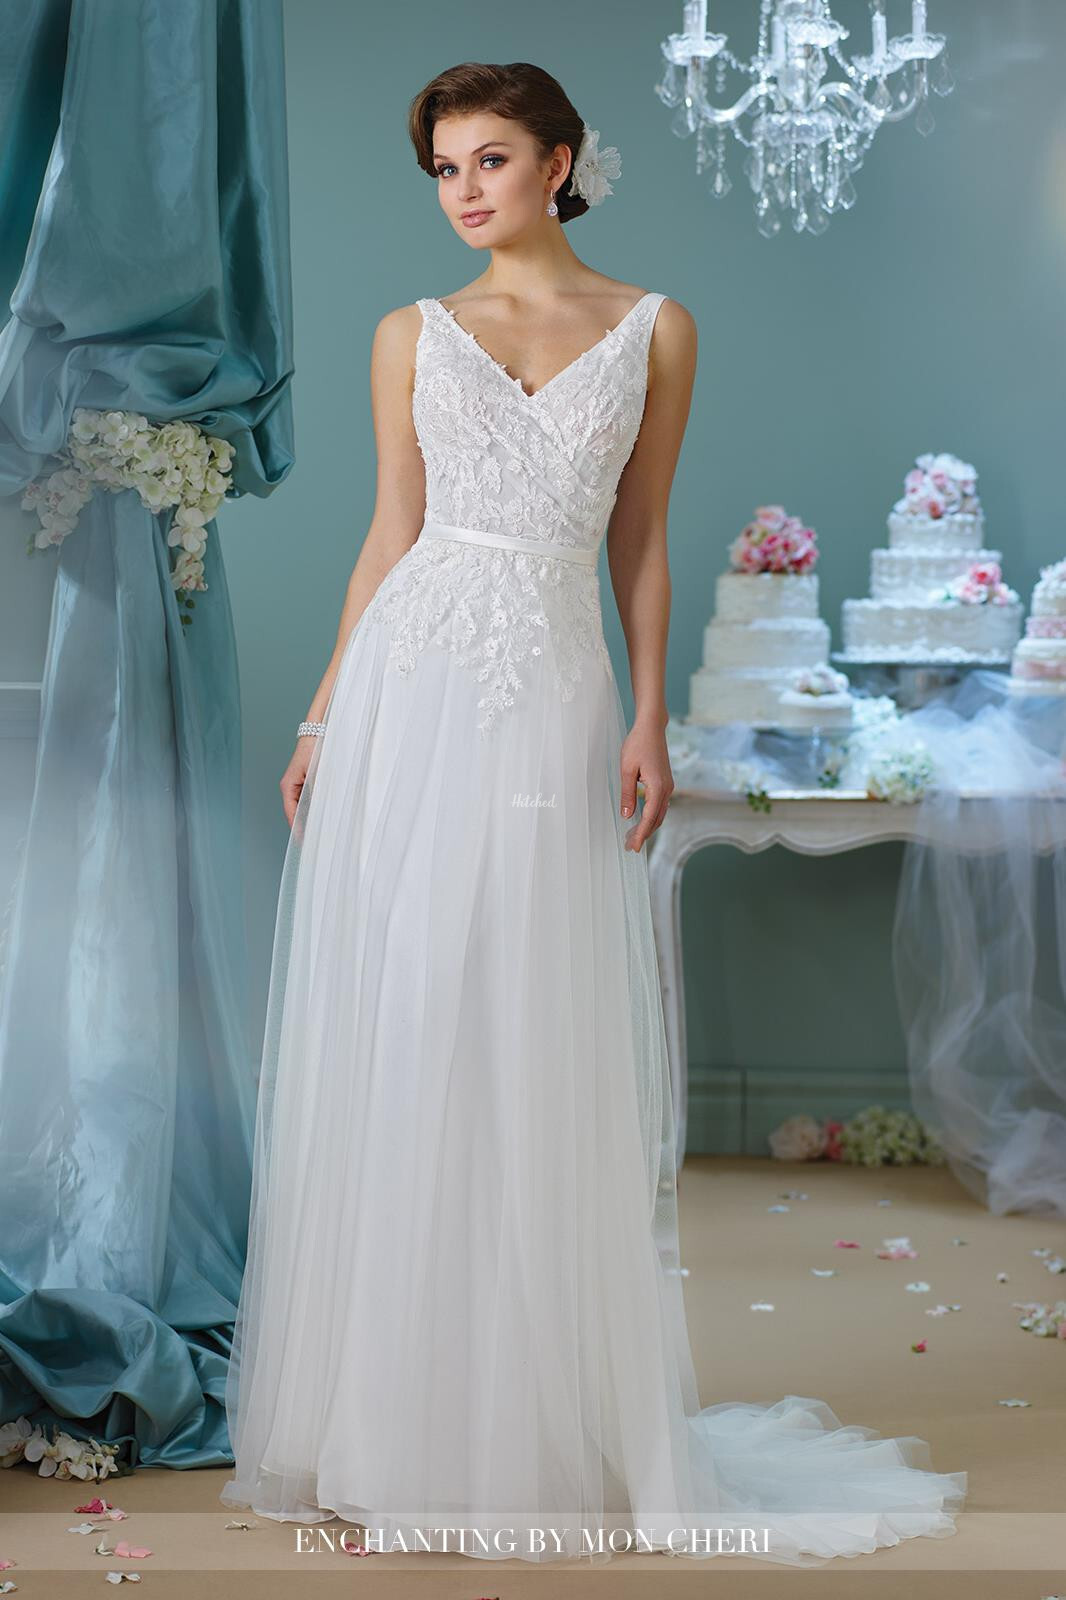 216164 Wedding Dress from Enchanting by Mon Cheri - hitched.co.uk